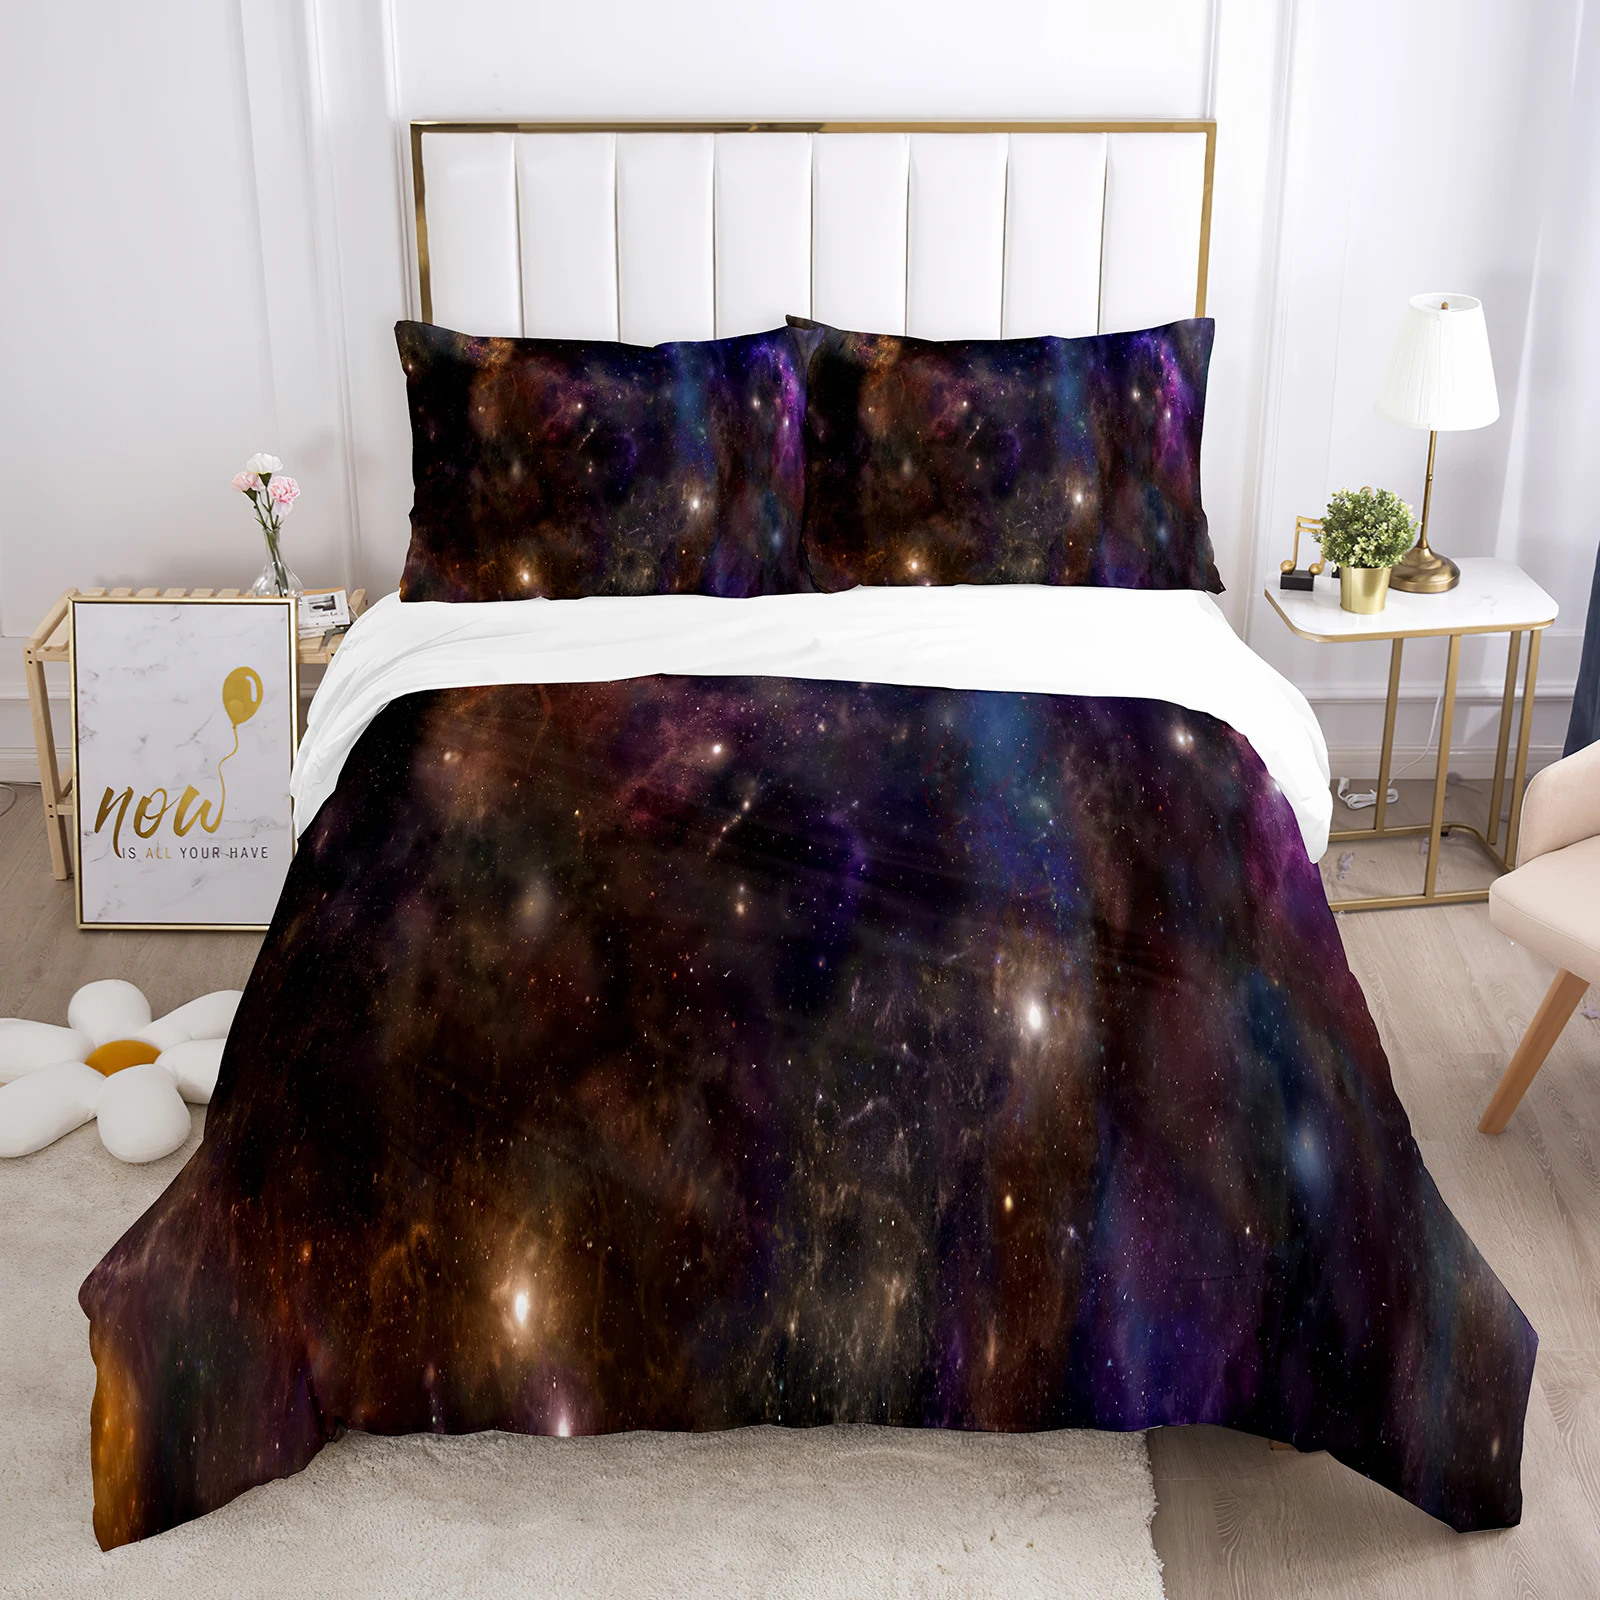 

Starry Sky Duvet Cover Set Microfiber Outer Space Theme Comforter Cover Teens Boys Quilt Cover 3D Starry Sky Series Bedding Set